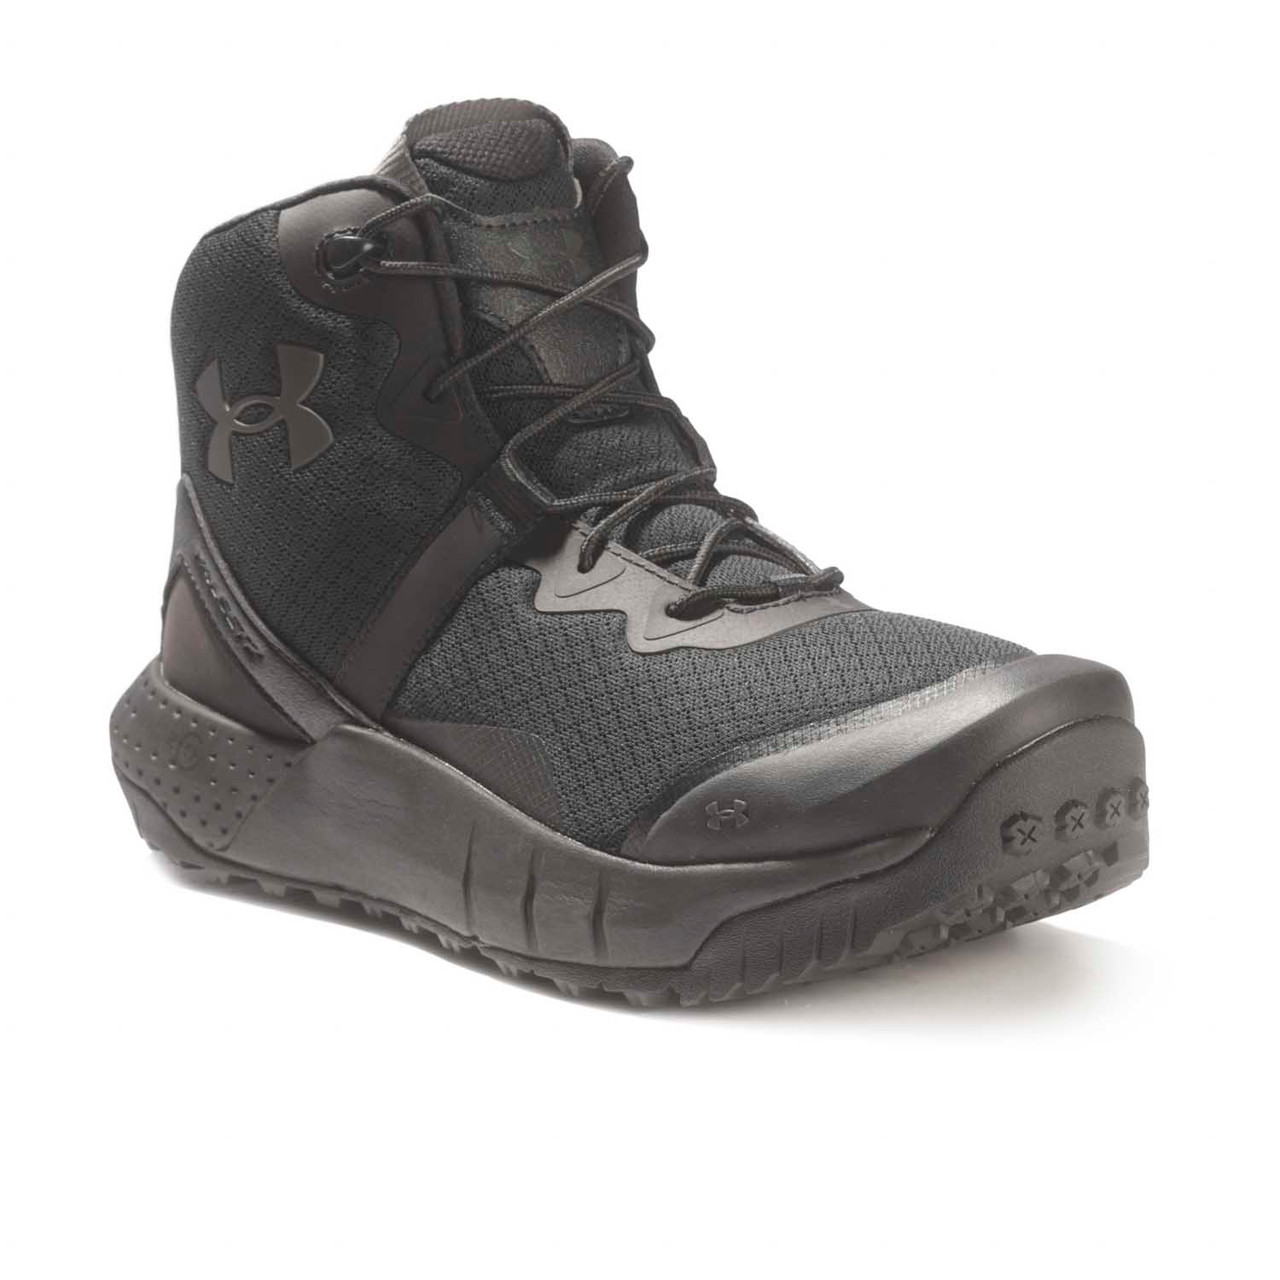 Under armour 10.5 US Tactical Boots Footwear